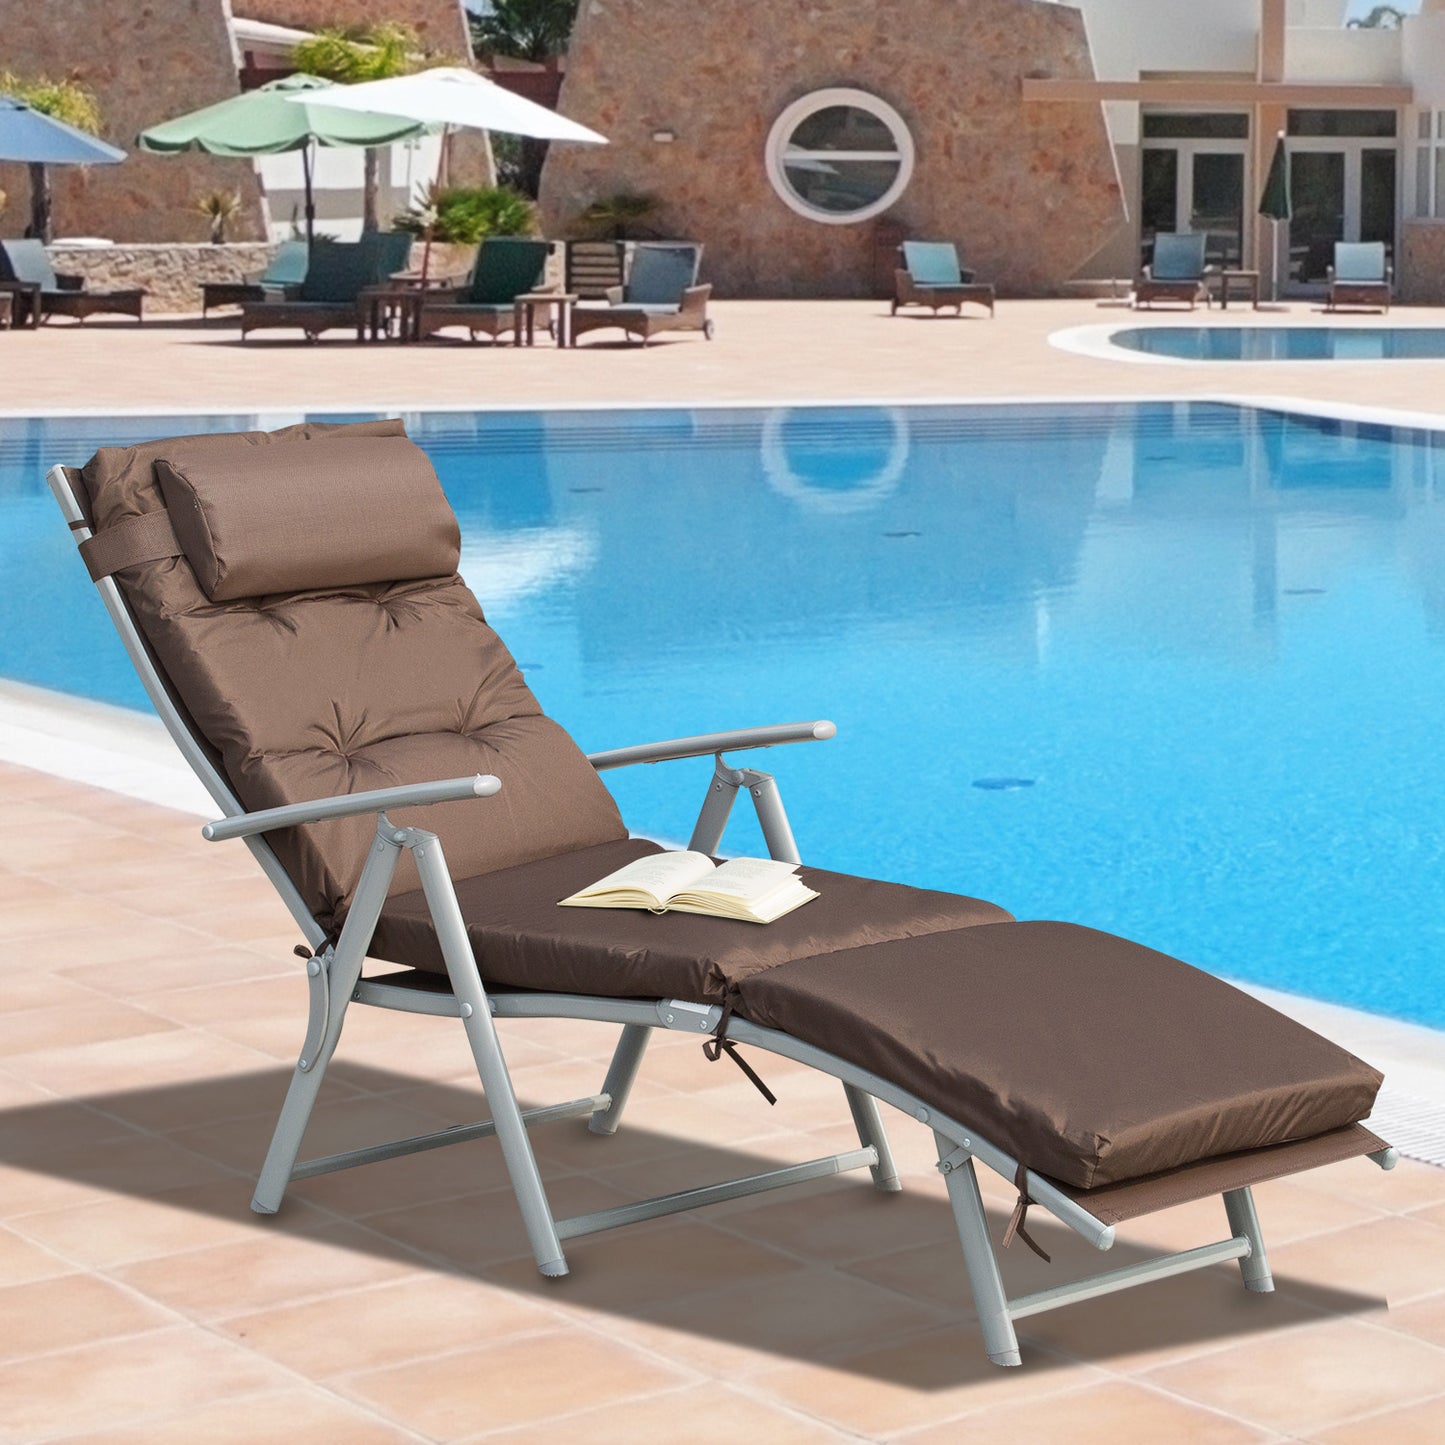 Outsunny Steel Frame Outdoor Garden Padded Sun Lounger w/ Pillow Brown